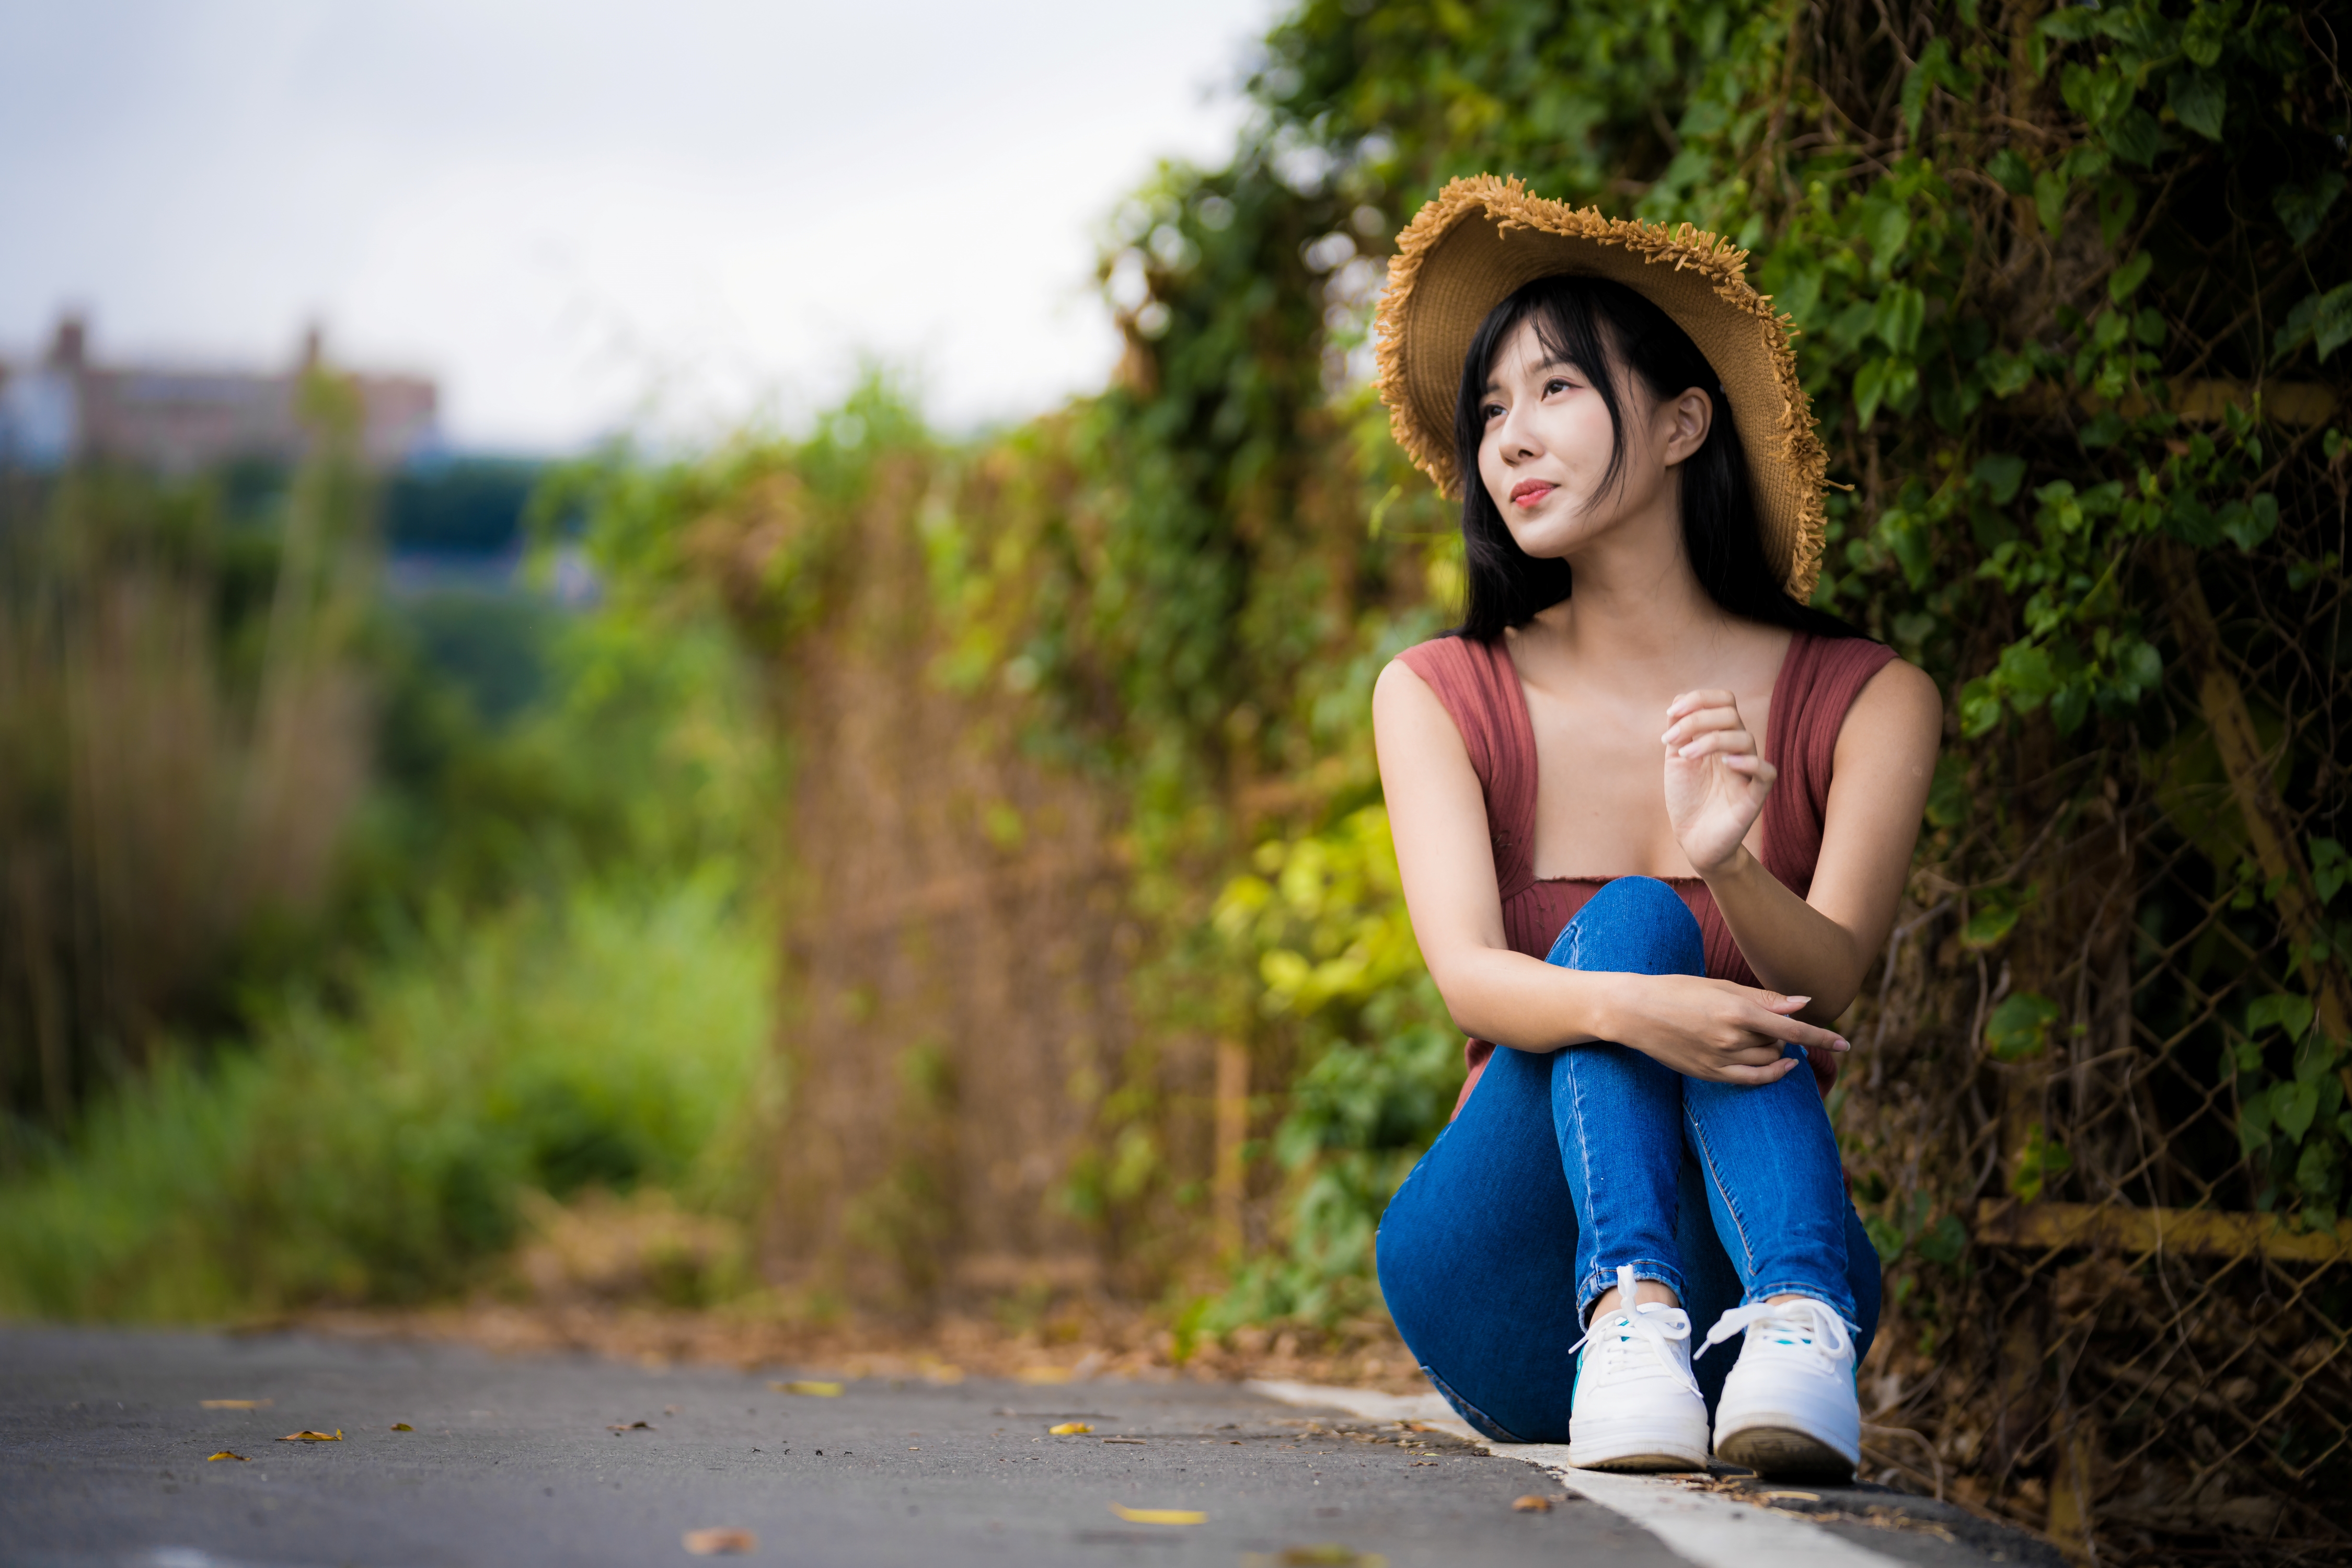 Women Model Asian Brunette Women With Hats Looking Up Smiling Brown Tops Jeans Sneakers Sitting Plan 4500x3000